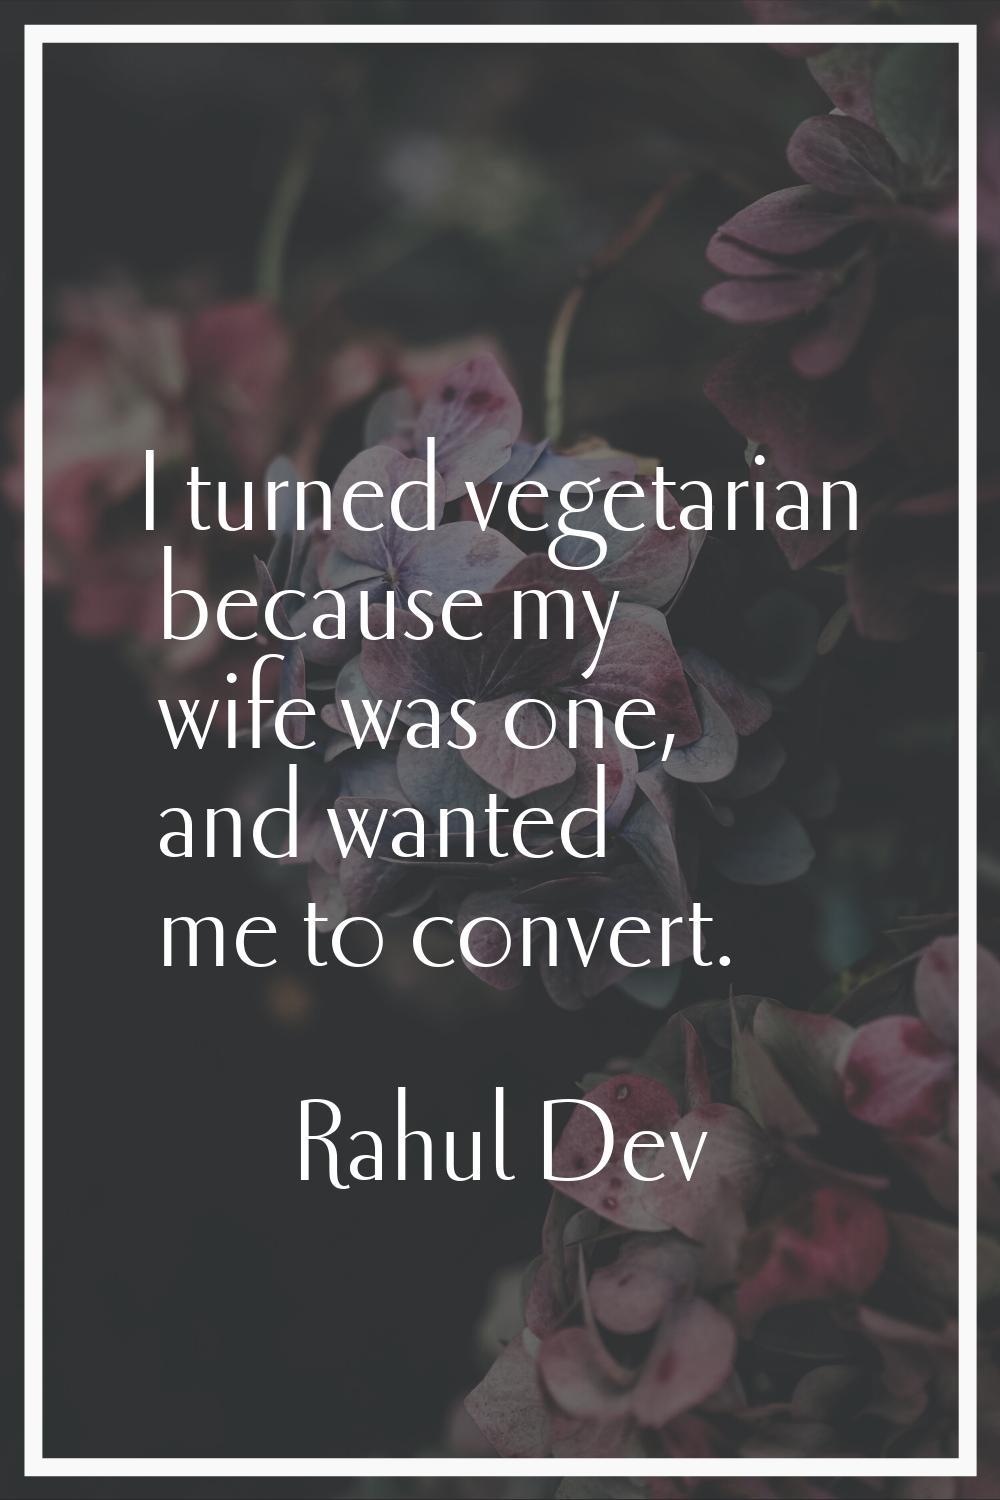 I turned vegetarian because my wife was one, and wanted me to convert.